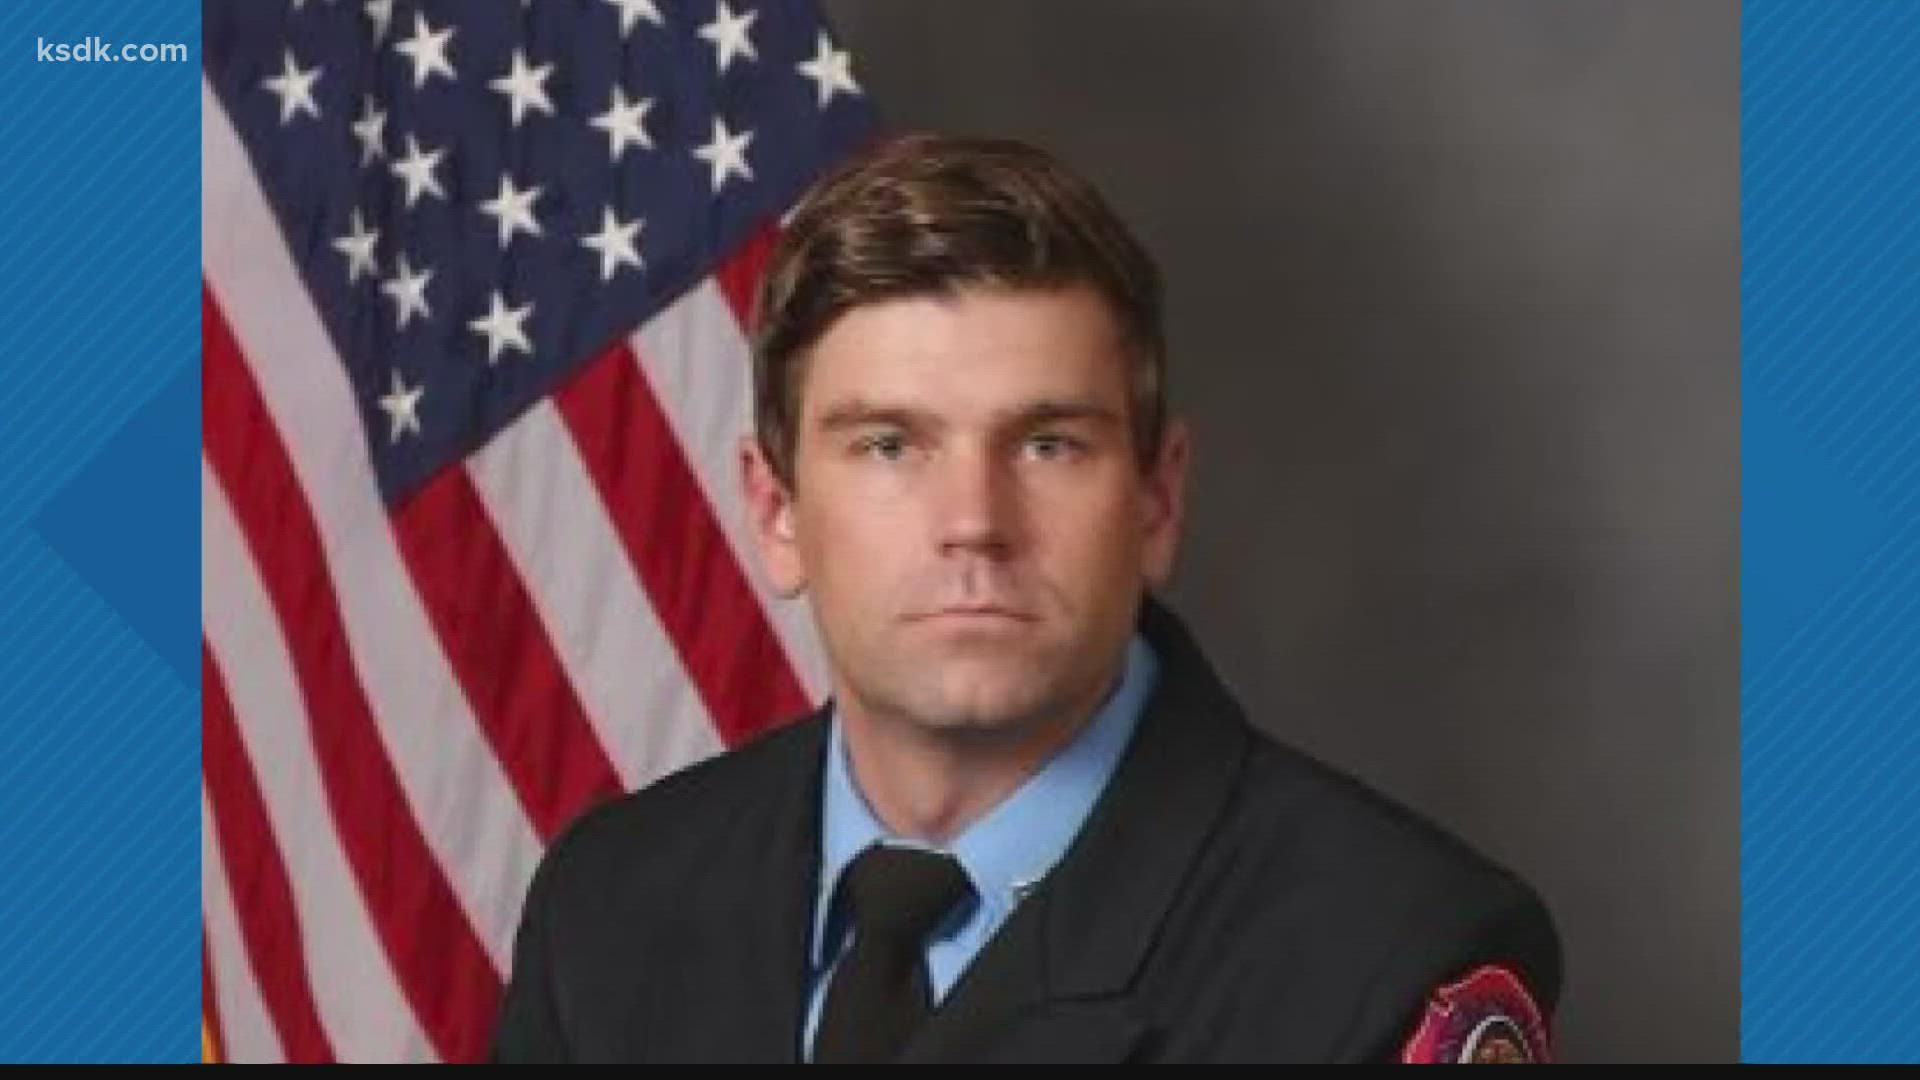 The roof of the building collapsed, burying two firefighters on the second floor. One of the firefighters, Benjamin Polson, died from his injuries.